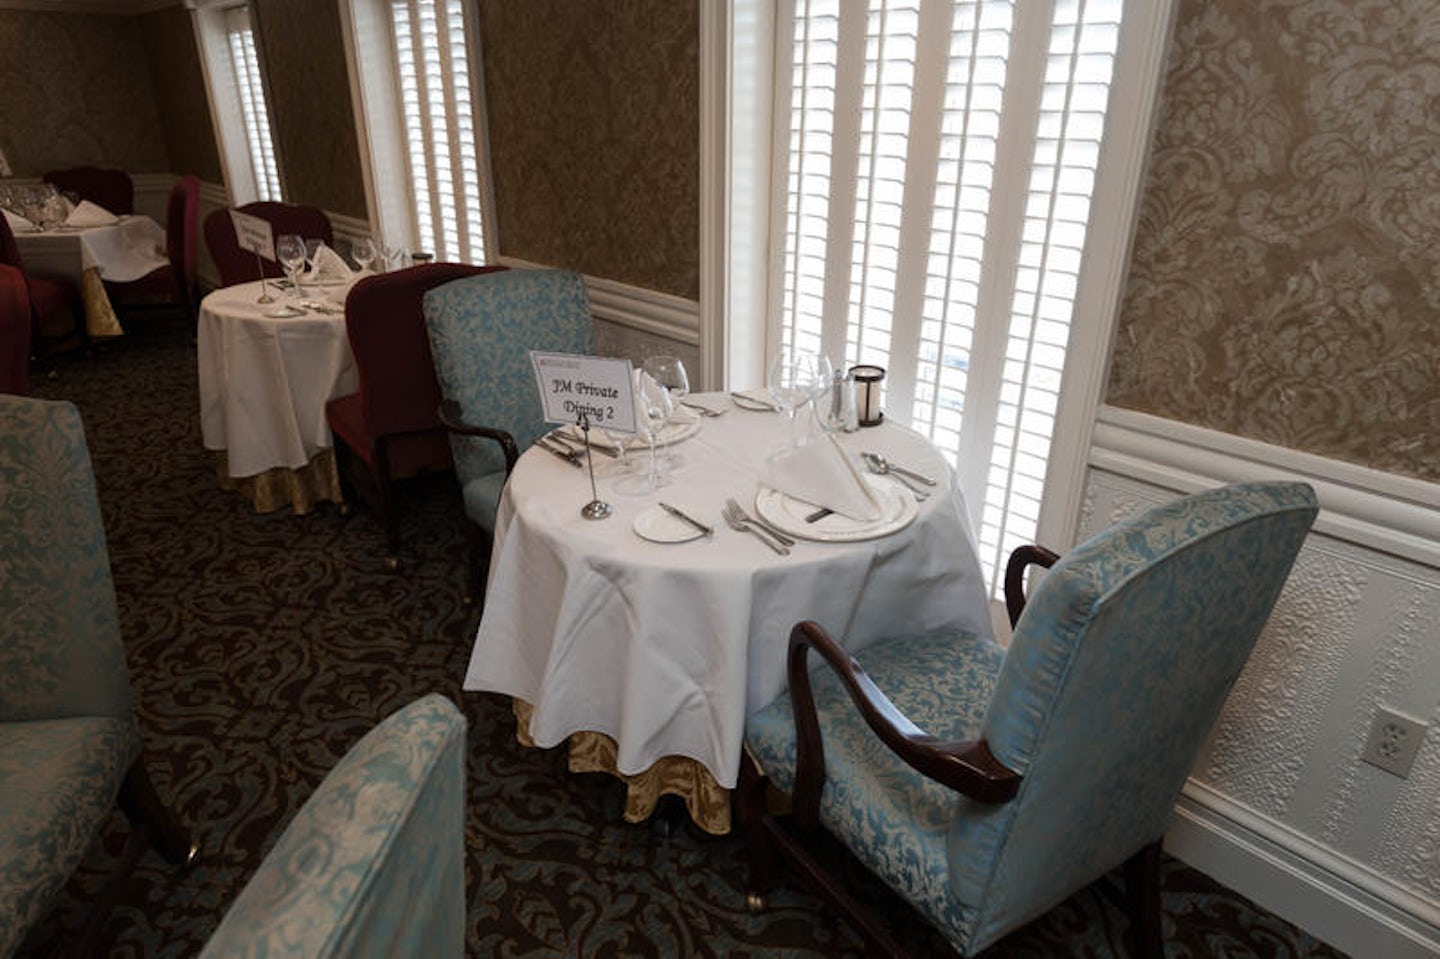 J.M. White Dining Room on American Queen